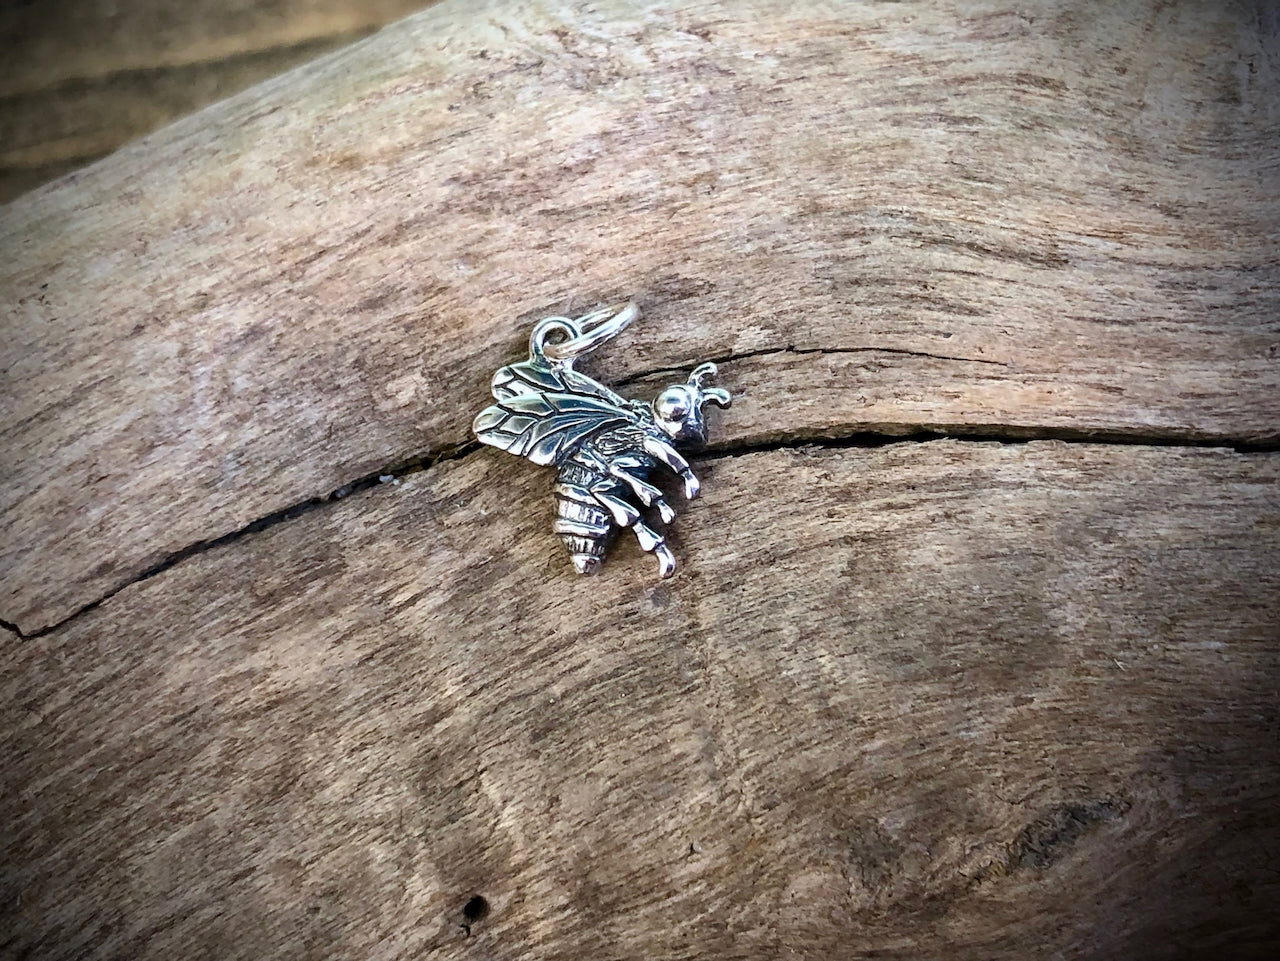 Sterling Bee Charm